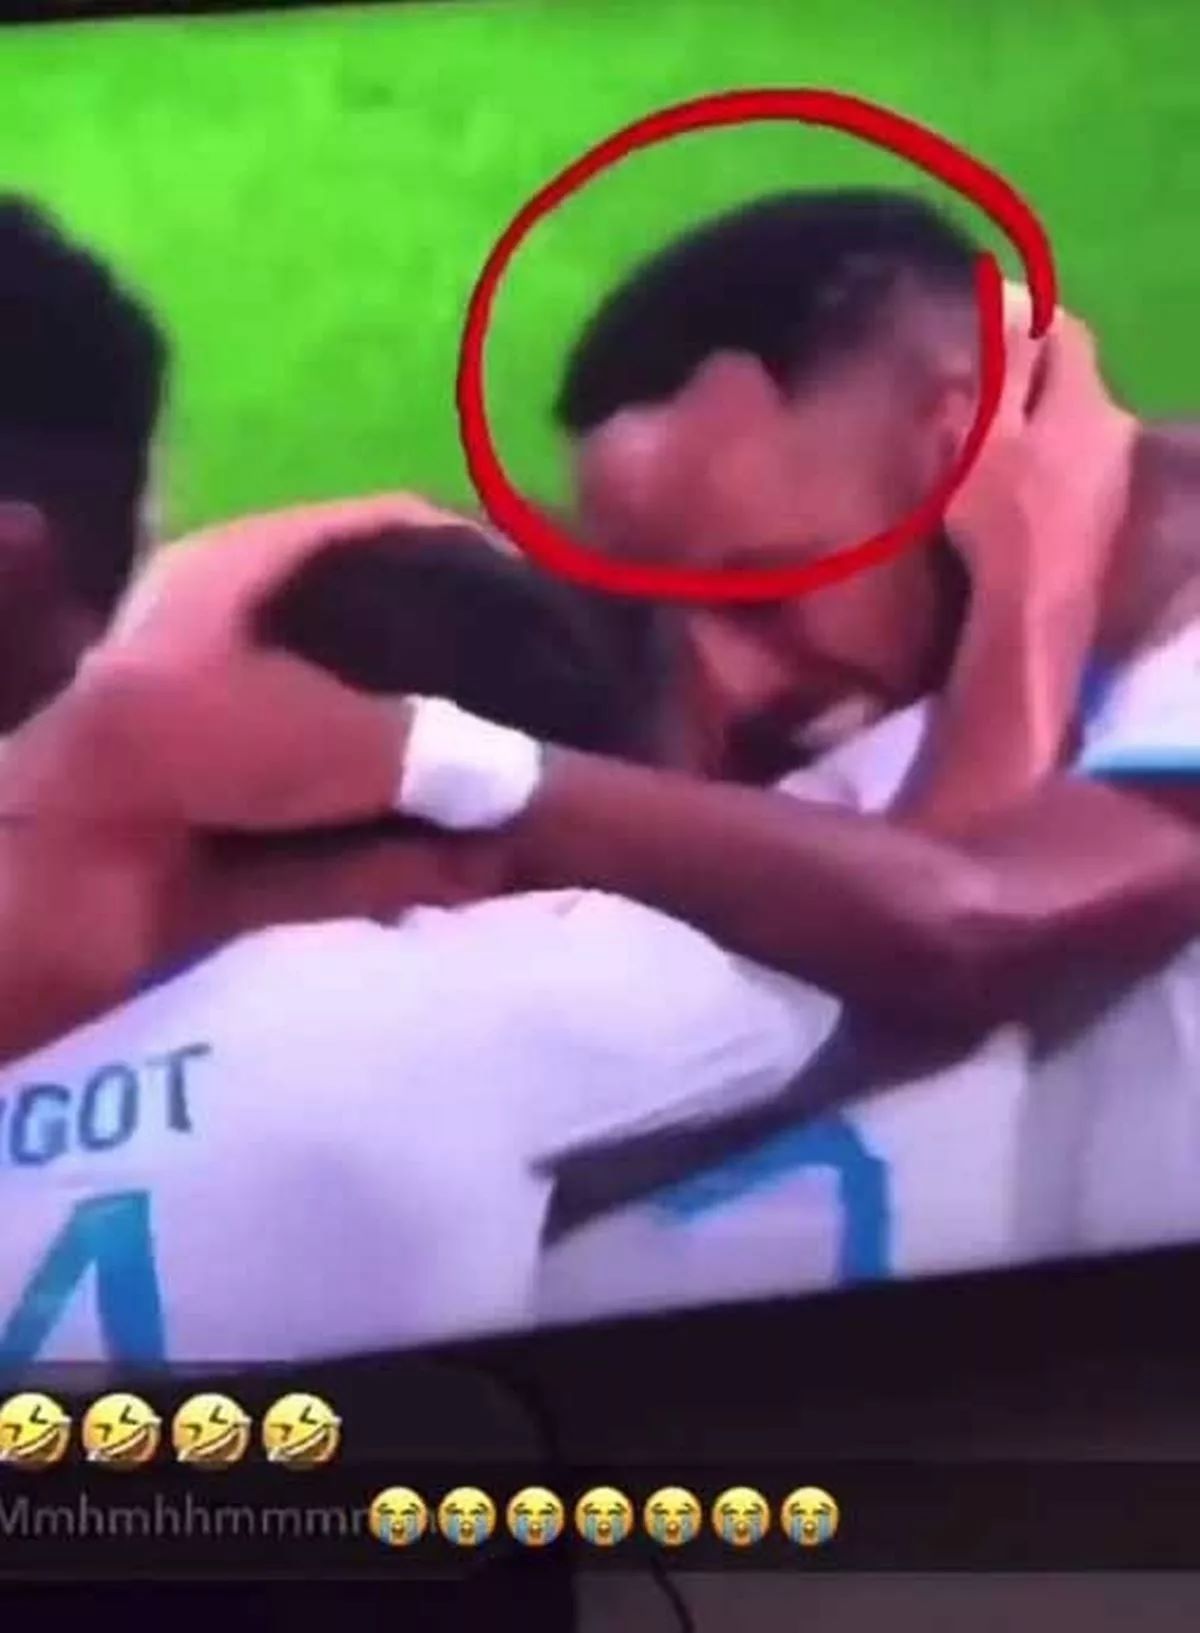 Auba’s hairline rubbed off accidentally by his teammates